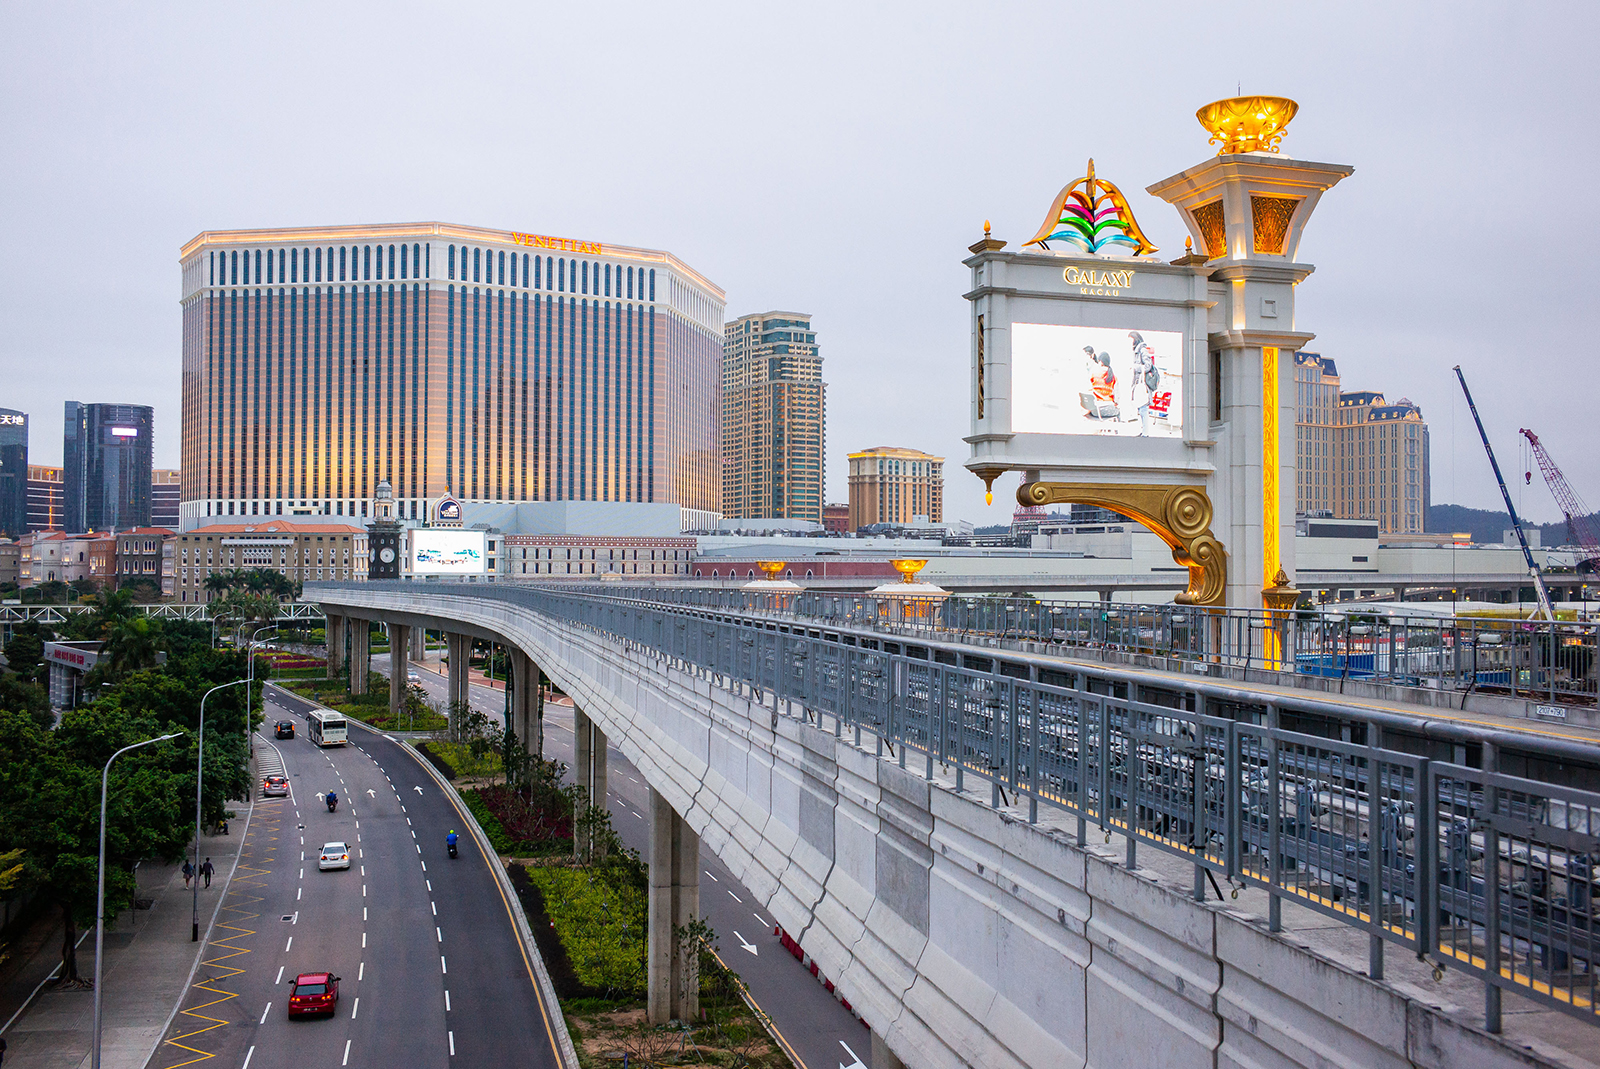 The Venetian Macao resort and casino, operated by Sands China Ltd., a unit of Las Vegas Sands Corp., left, and the Galaxy Macau casino and hotel, developed by Galaxy Entertainment Group Ltd.